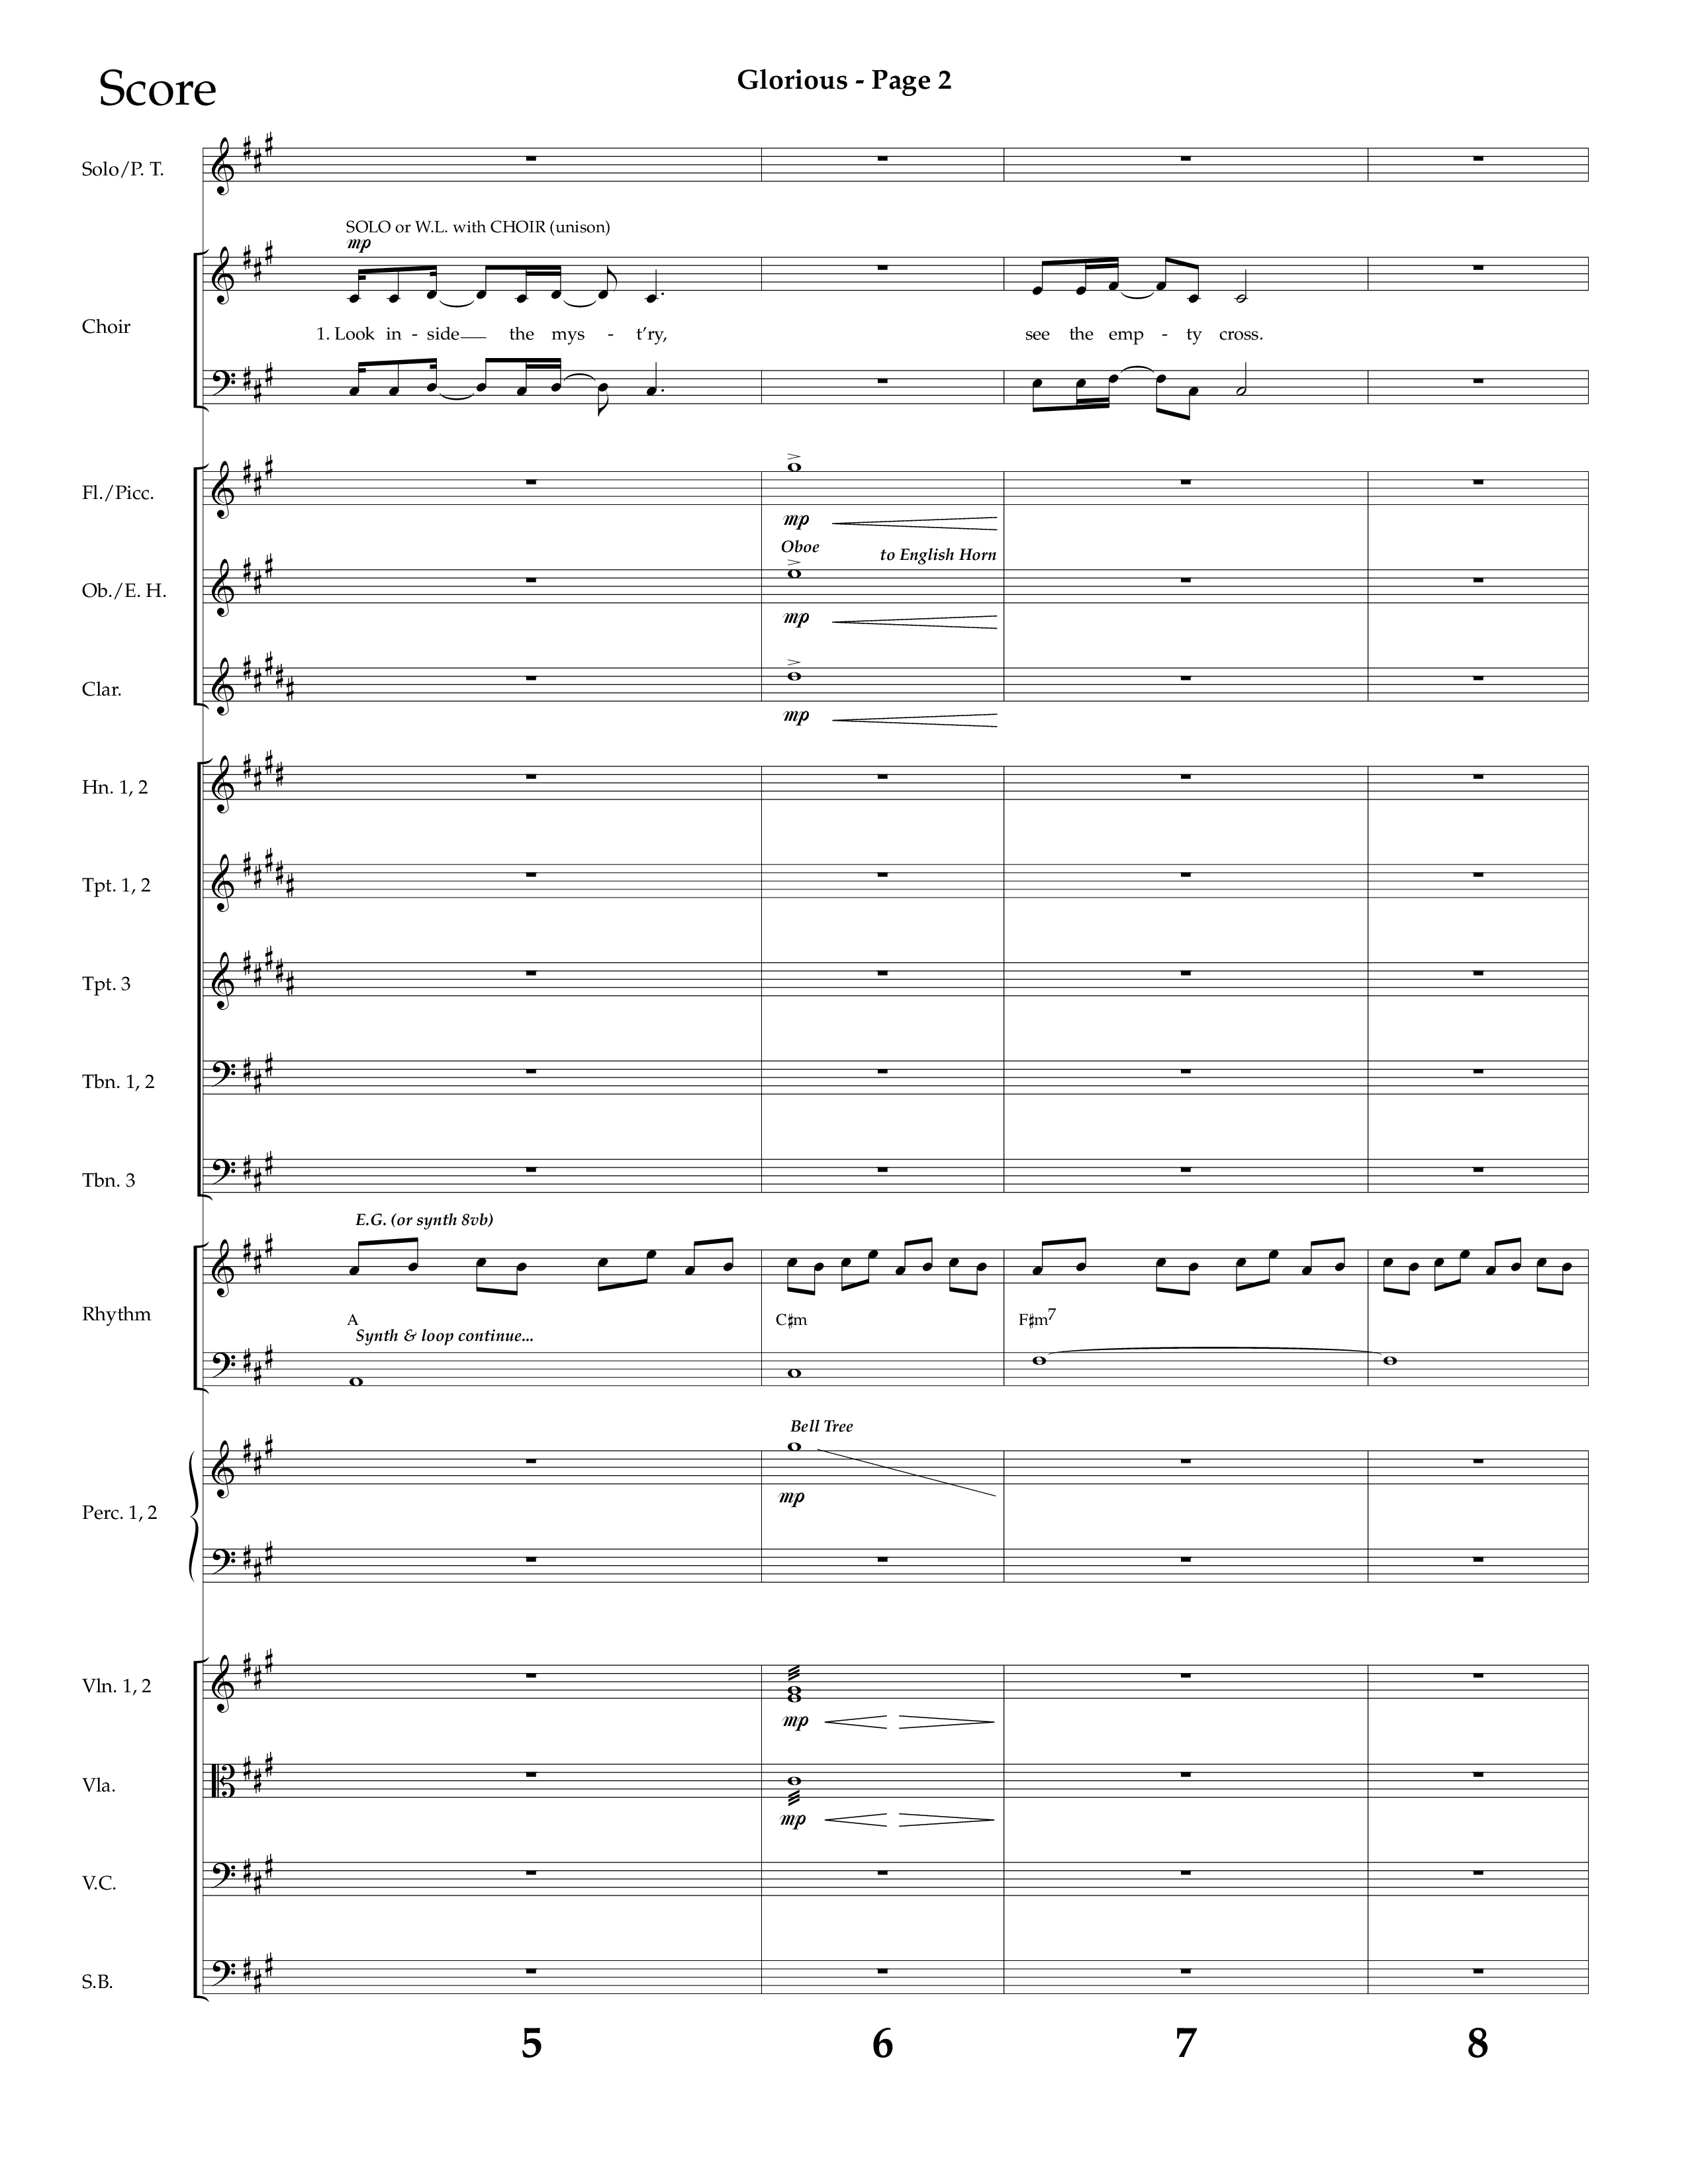 Glorious (Choral Anthem SATB) Orchestration (Lifeway Choral / Arr. Dave Williamson)